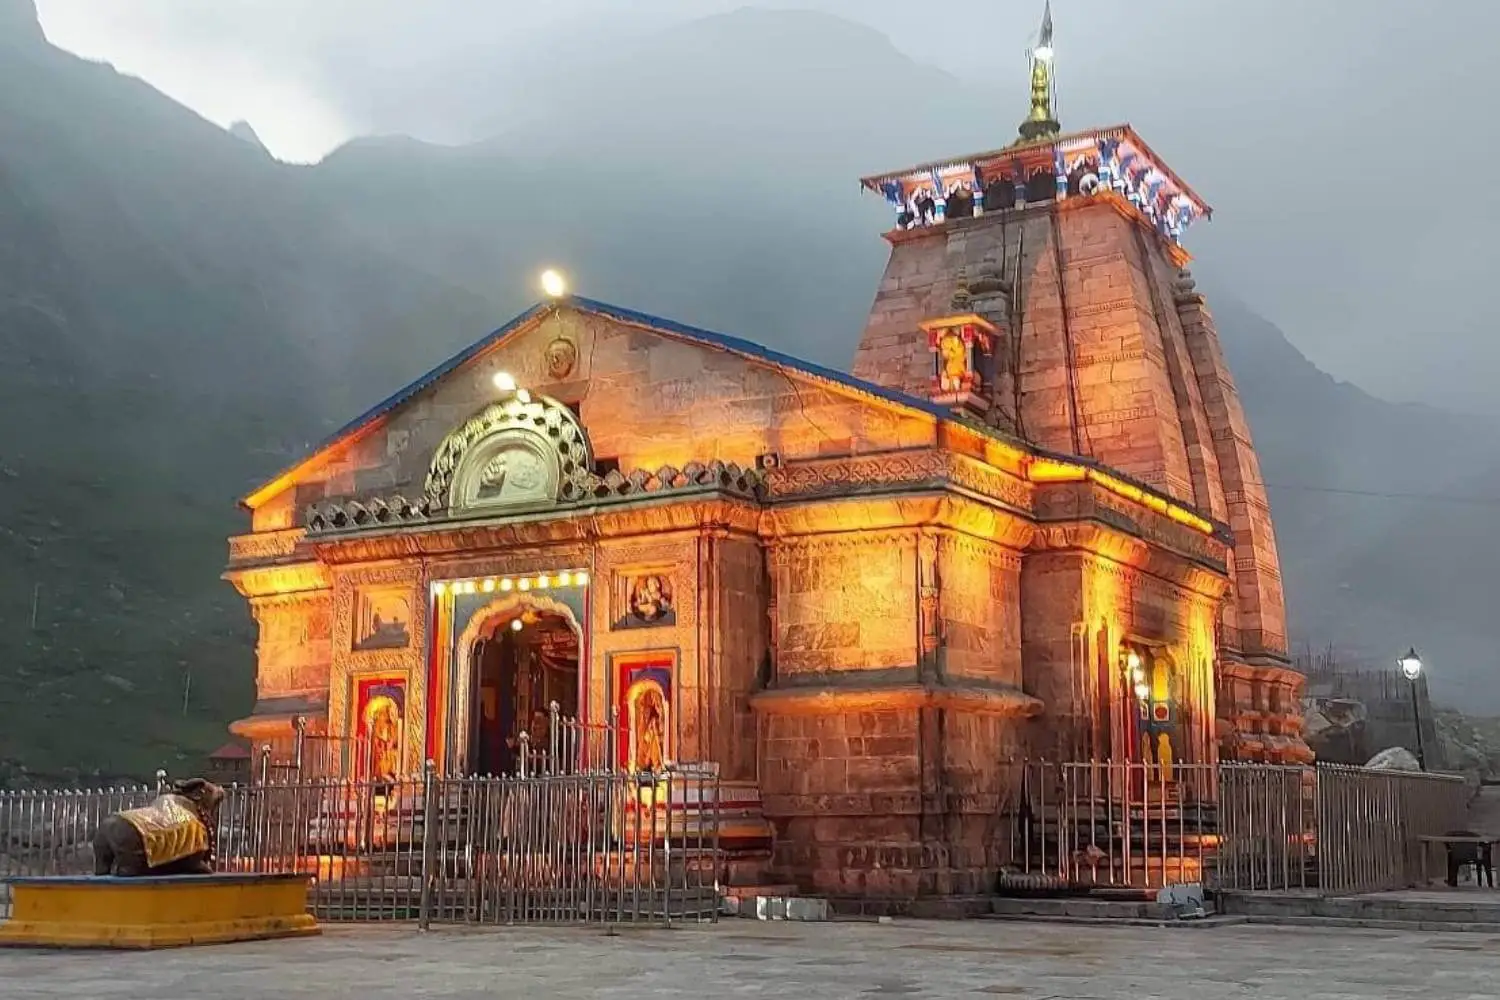 orkers involved in the restoration and preservation efforts of Kedarnath Temple following a devastating flood, showcasing ongoing reconstruction work.